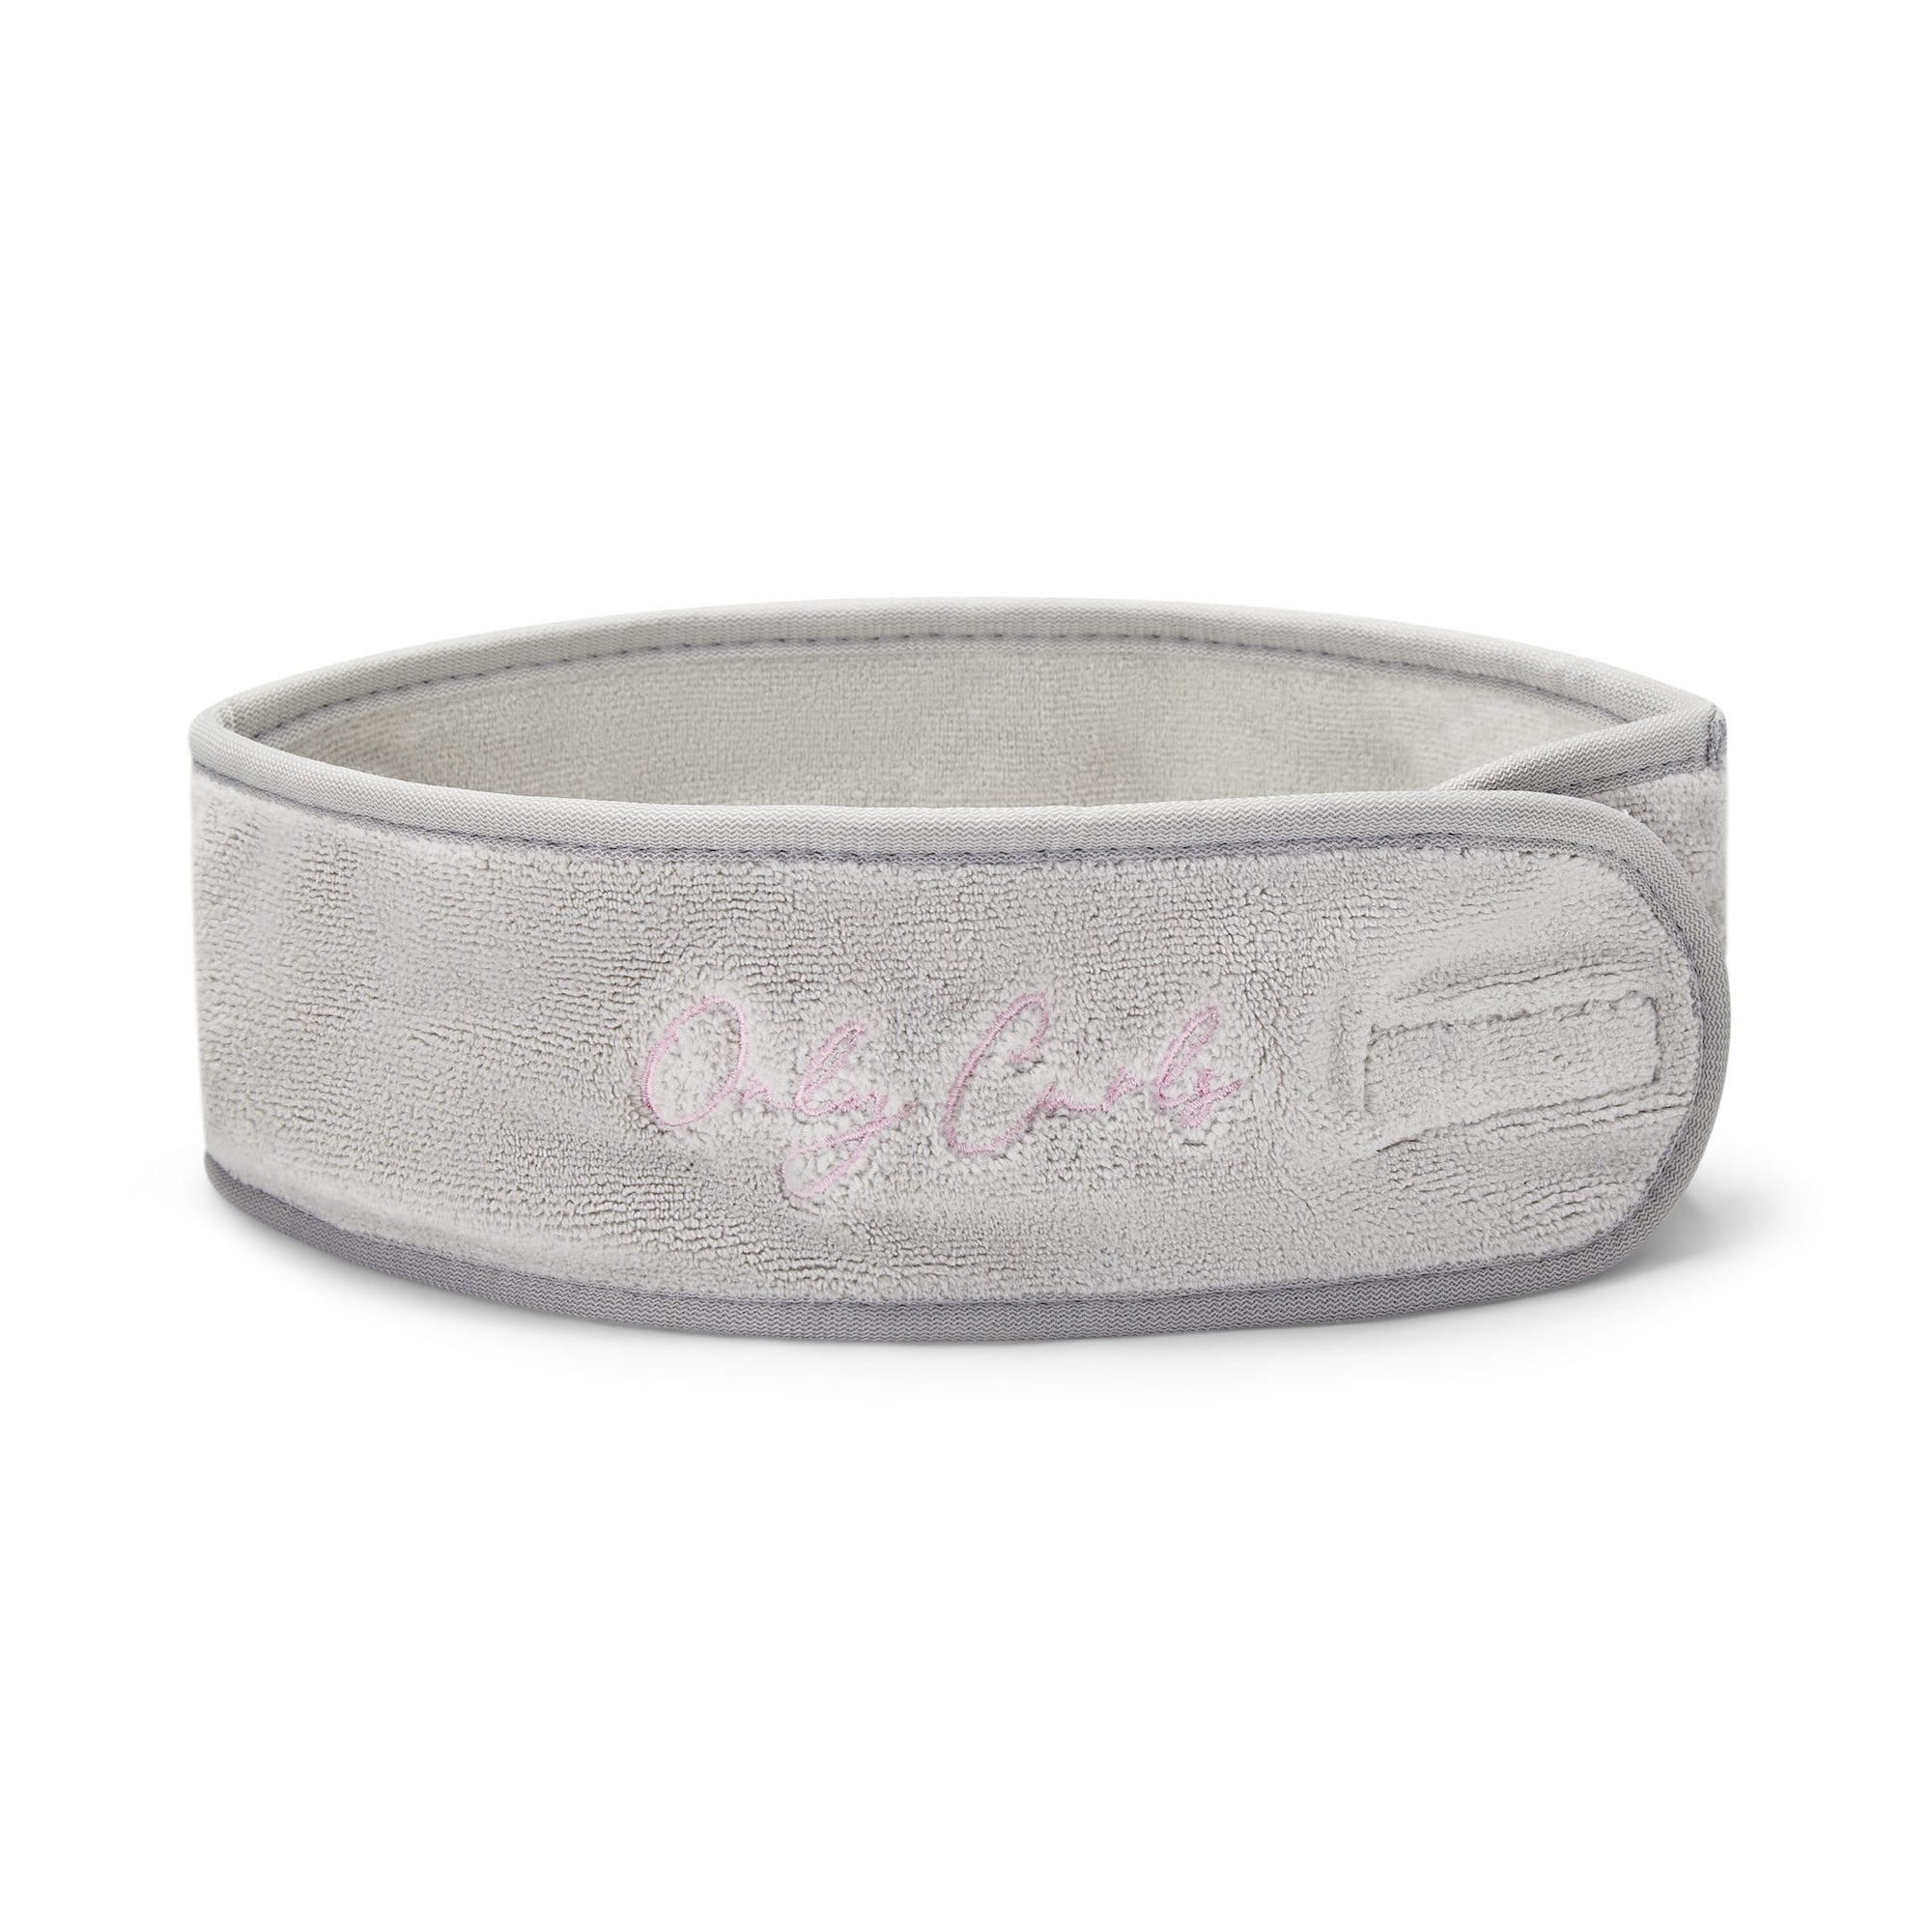 Only Curls Microfibre Headband - Silver - Only Curls